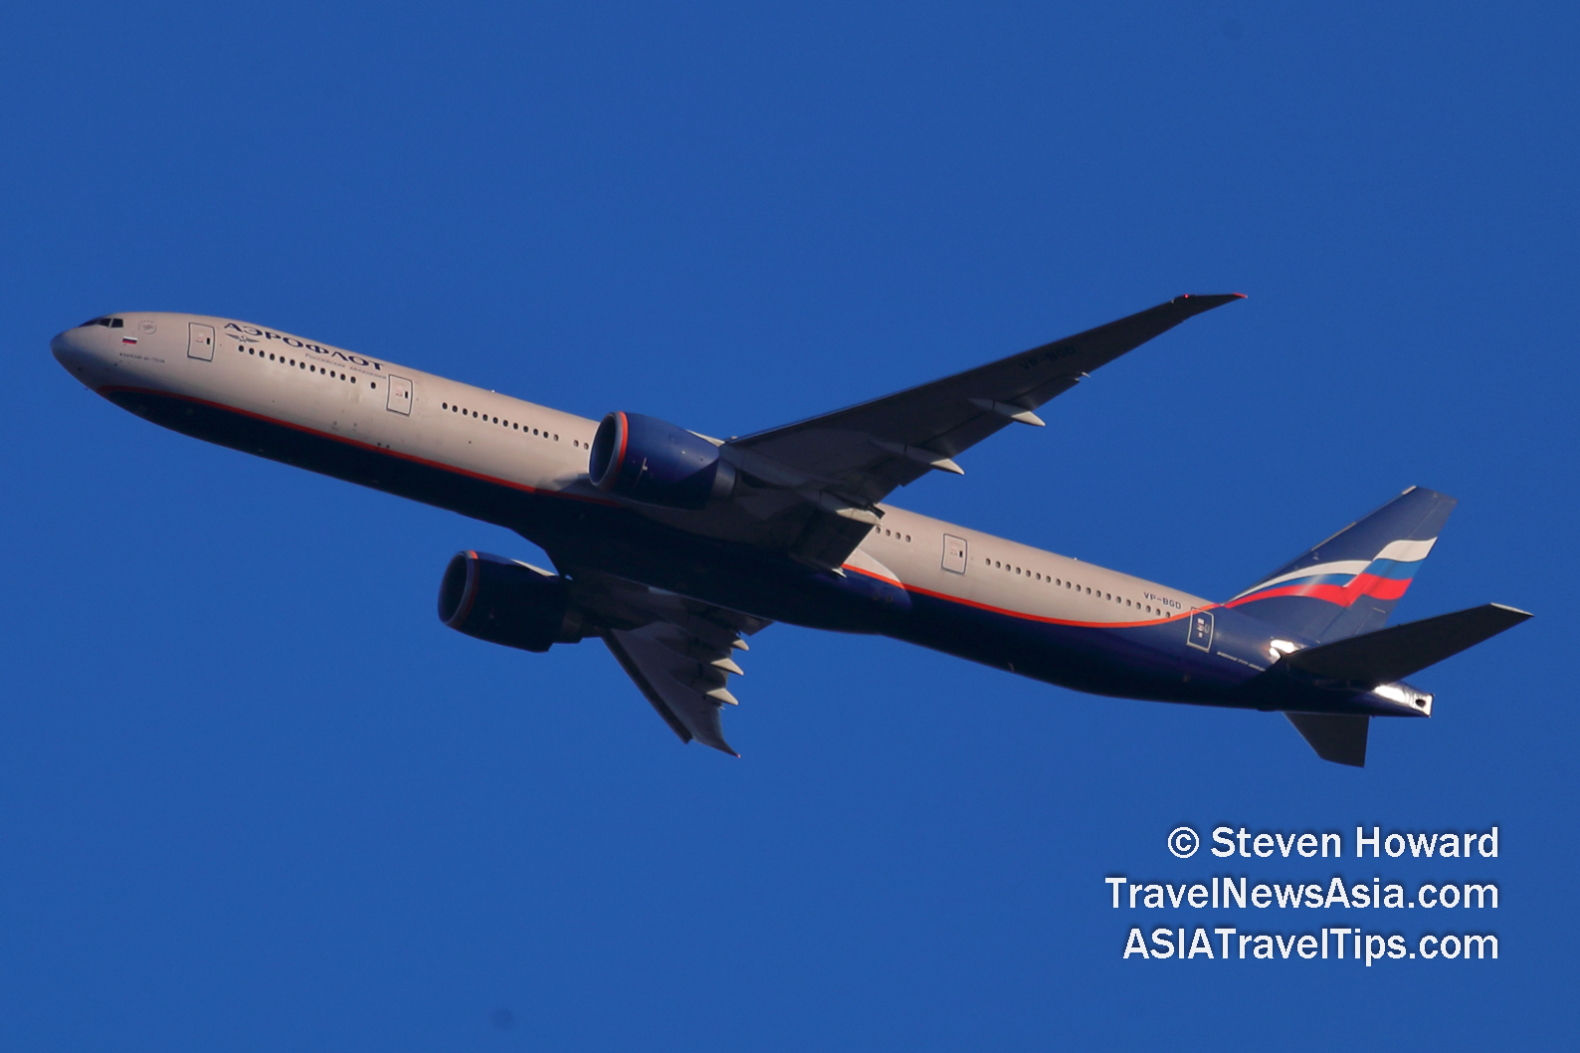 Aeroflot Boeing 777 reg: VP-BGD. Picture by Steven Howard of TravelNewsAsia.com Click to enlarge.